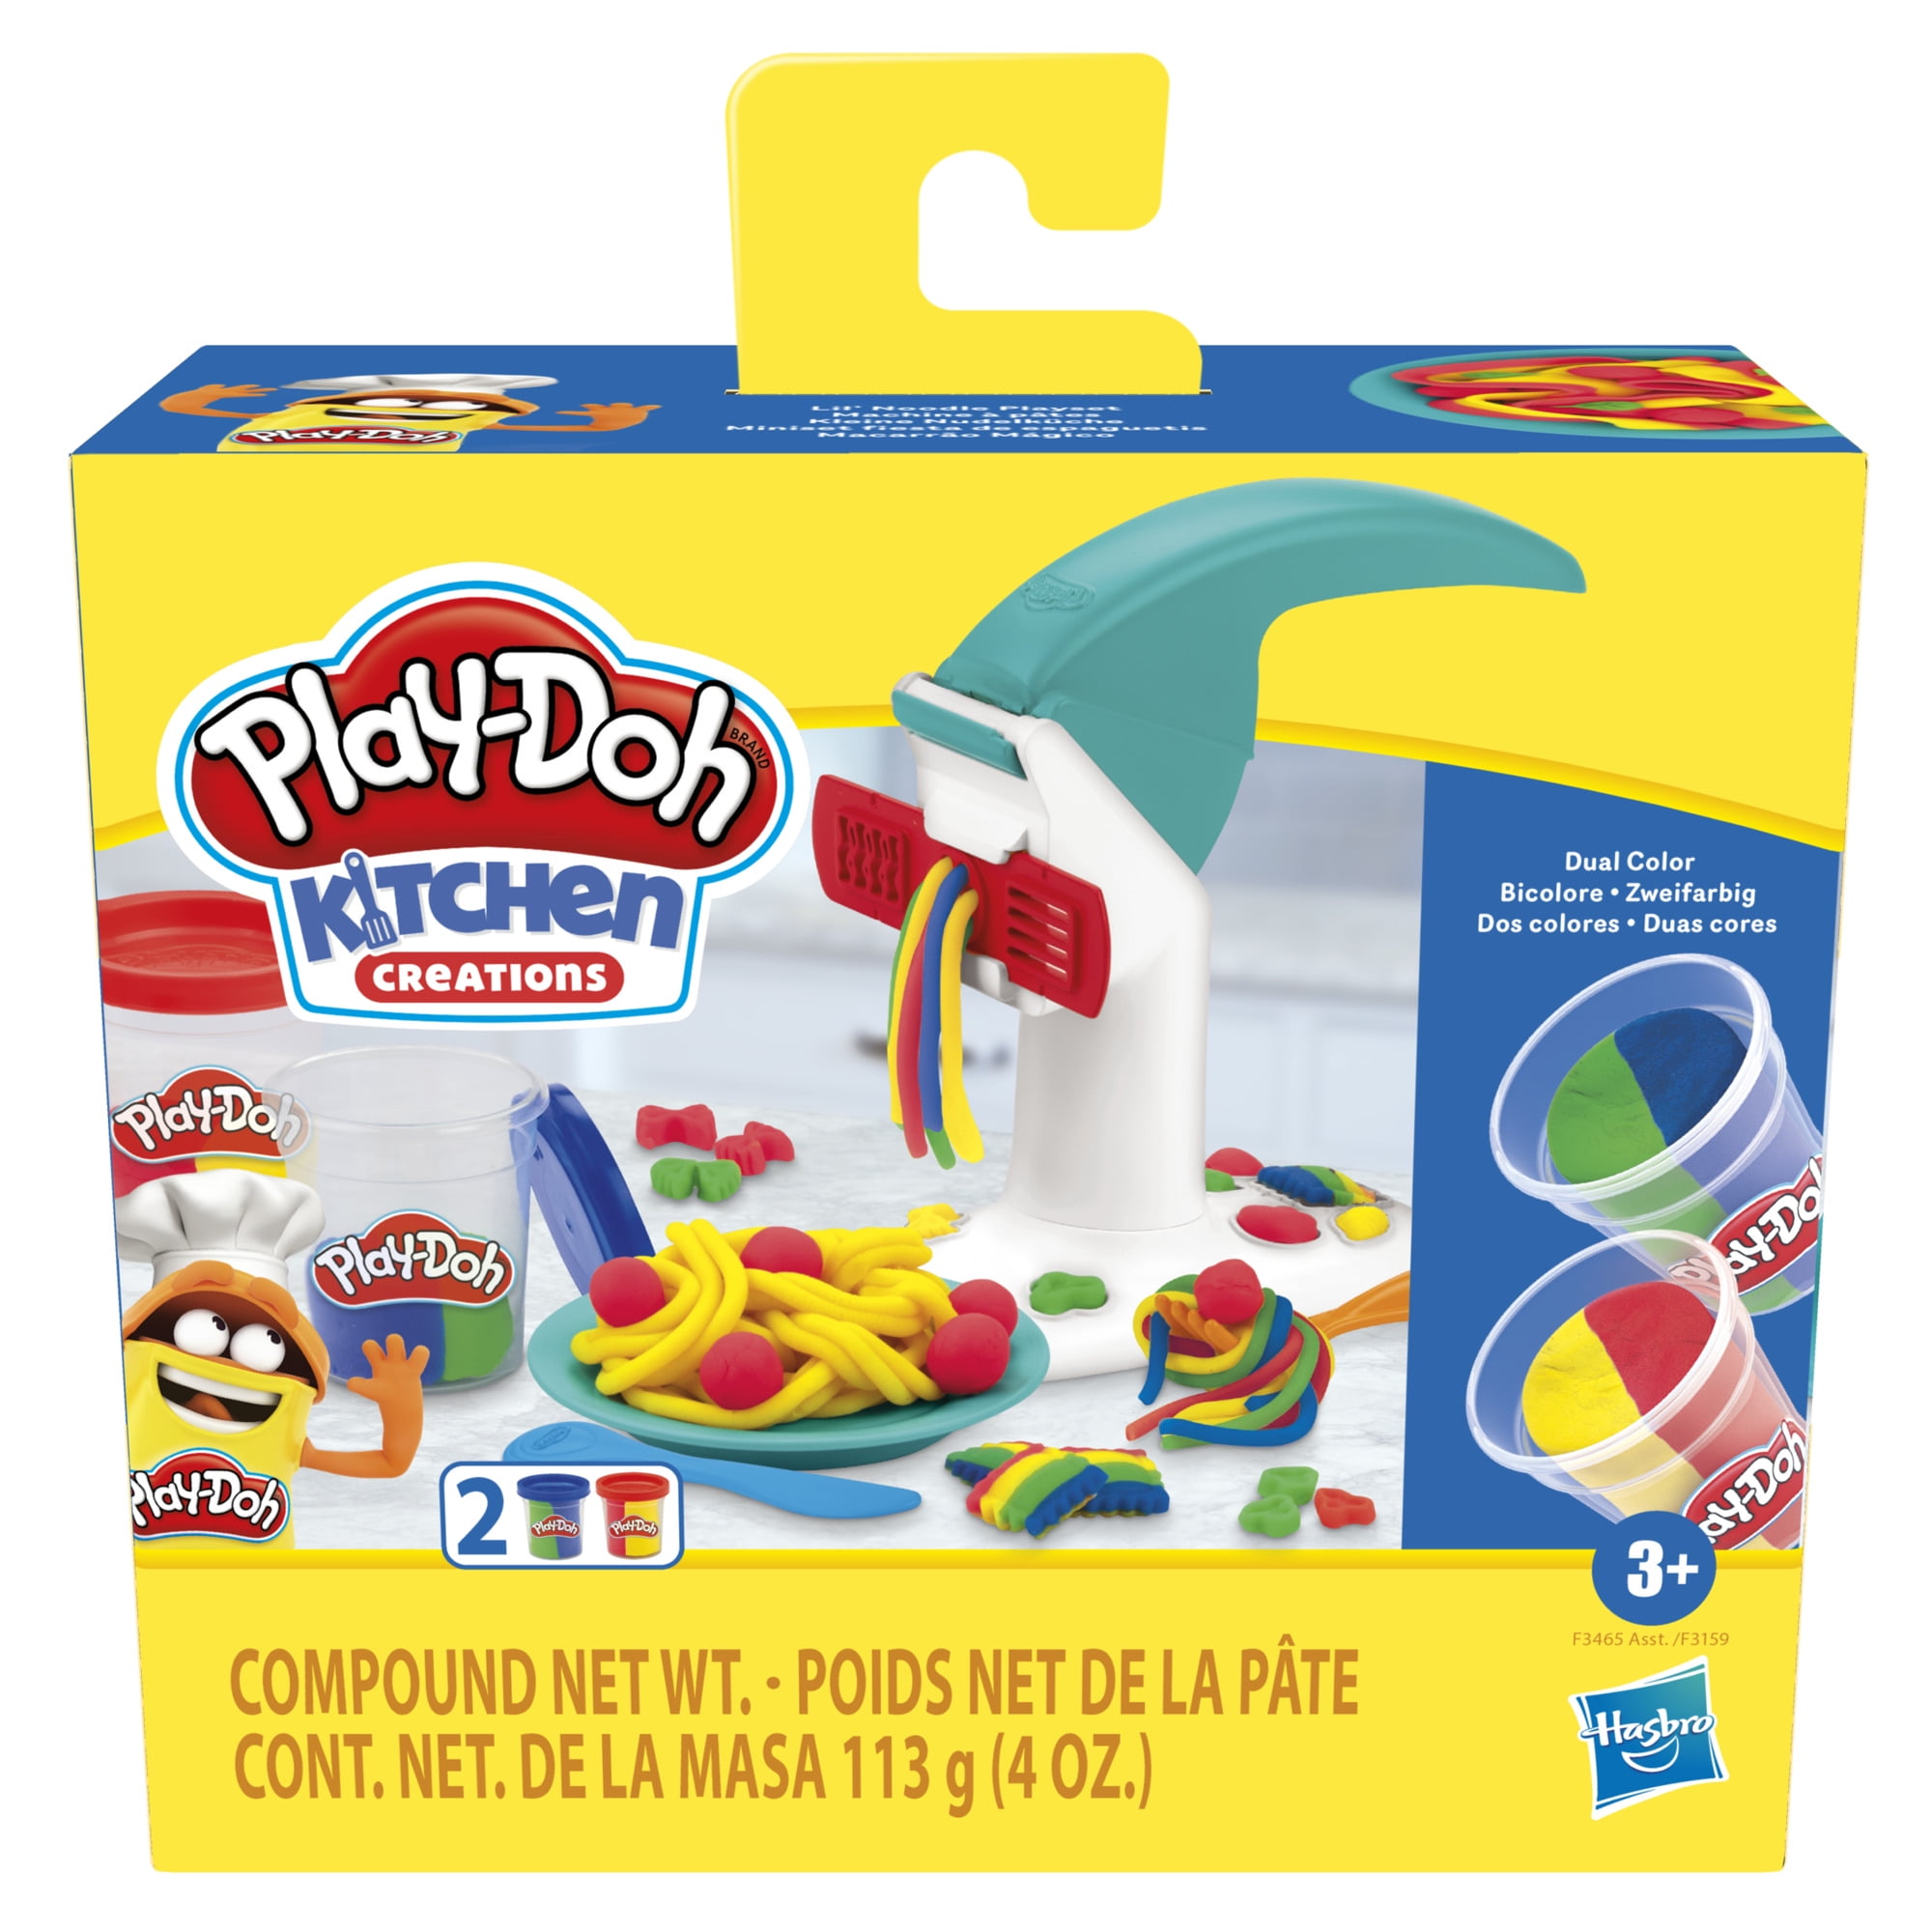 Play-Doh Kitchen Creations Spiral Fries Playset for Kids Ages 3+ 